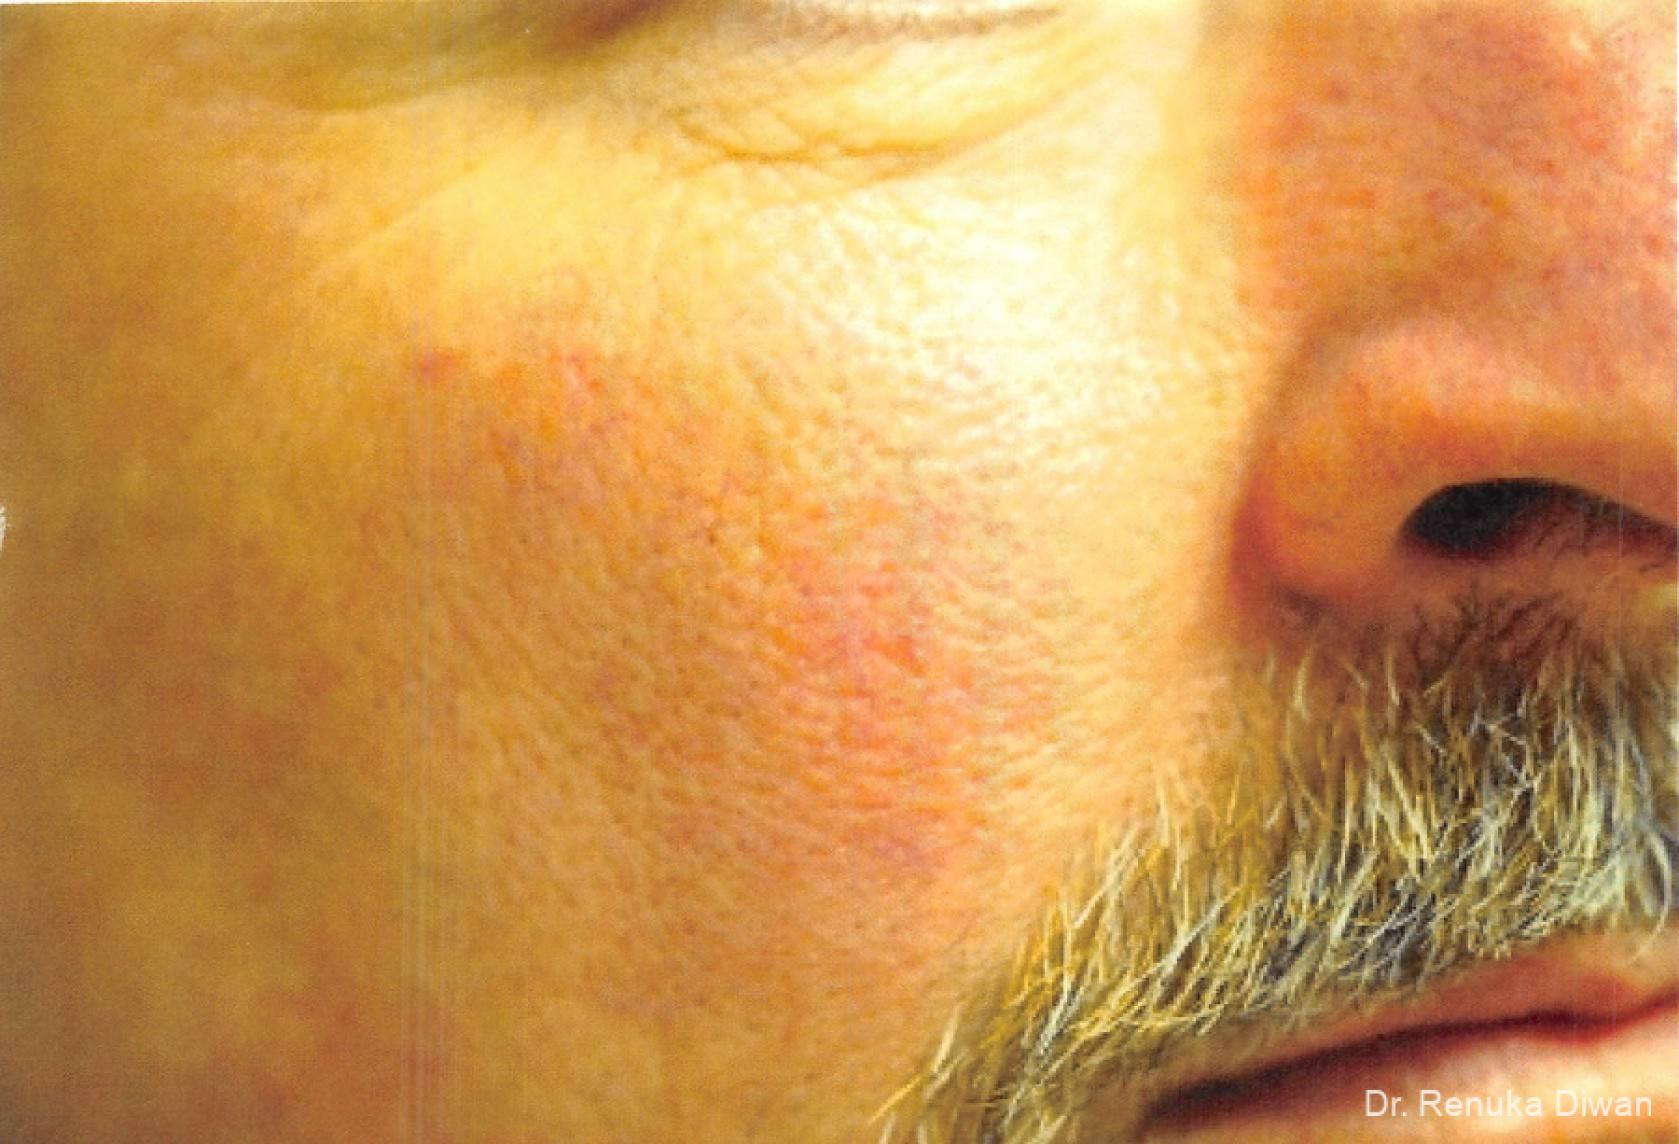 Laser For Veins And Redness For Men: Patient 6 - After 1